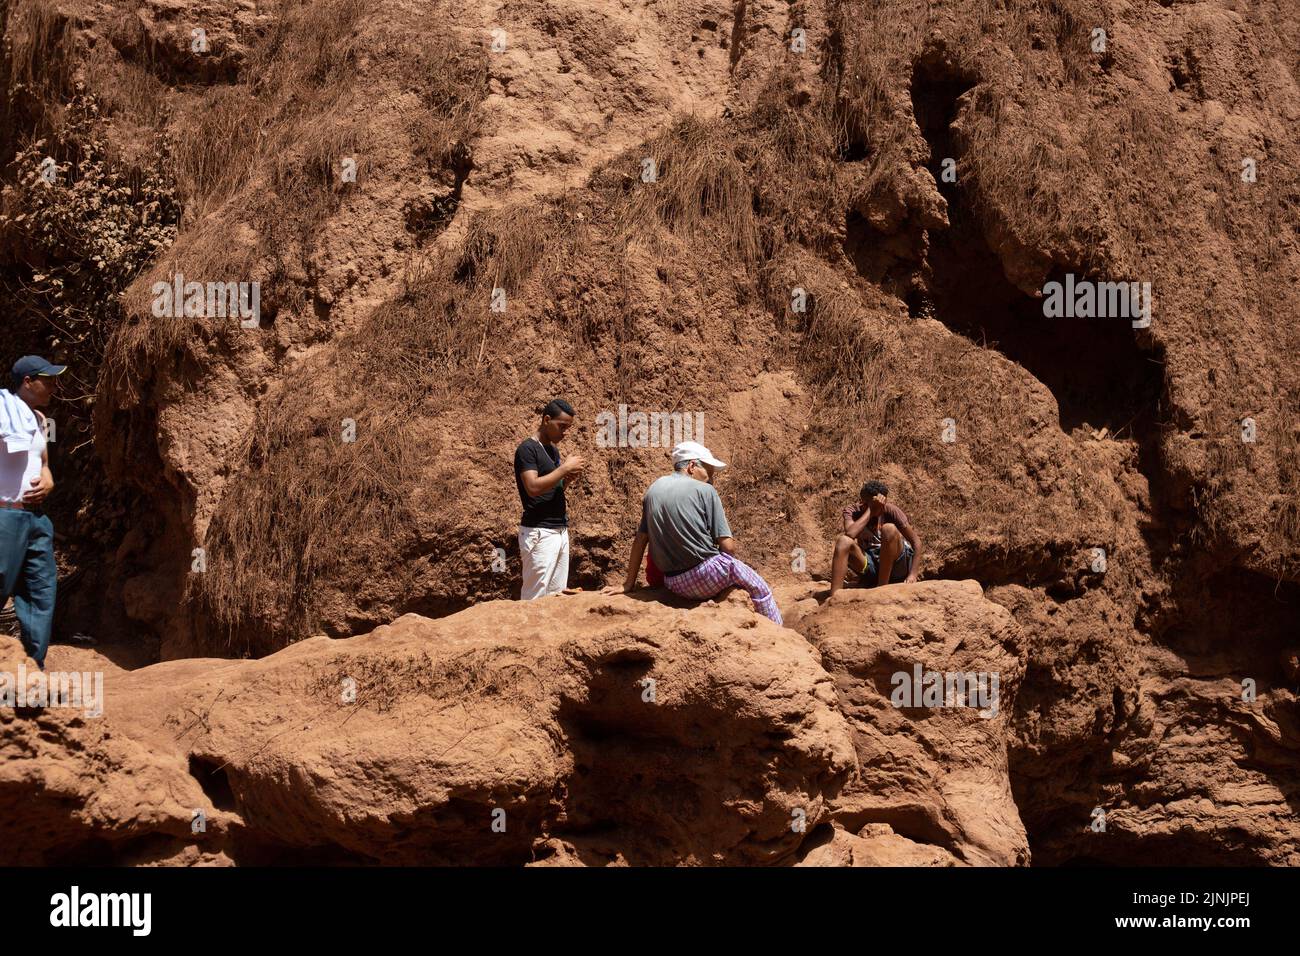 The sitting people at Ouzoud waterfall Marrakesh morocco Stock Photo